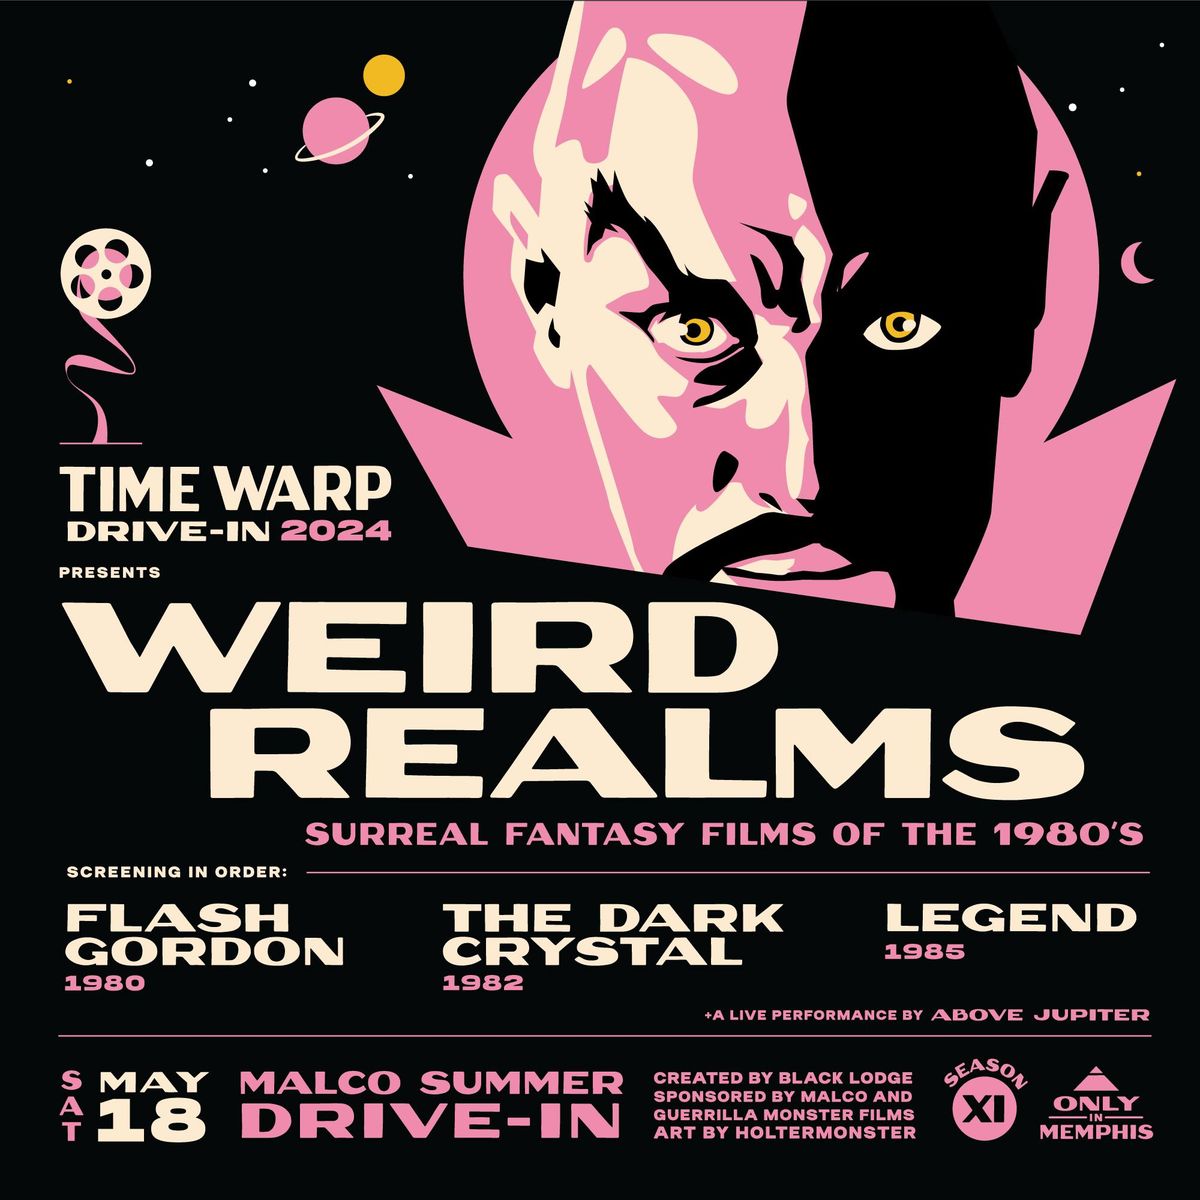 Time Warp Drive-In | WEIRD REALMS: THE SURREAL FANTASY FILMS OF THE 1980\u2019S